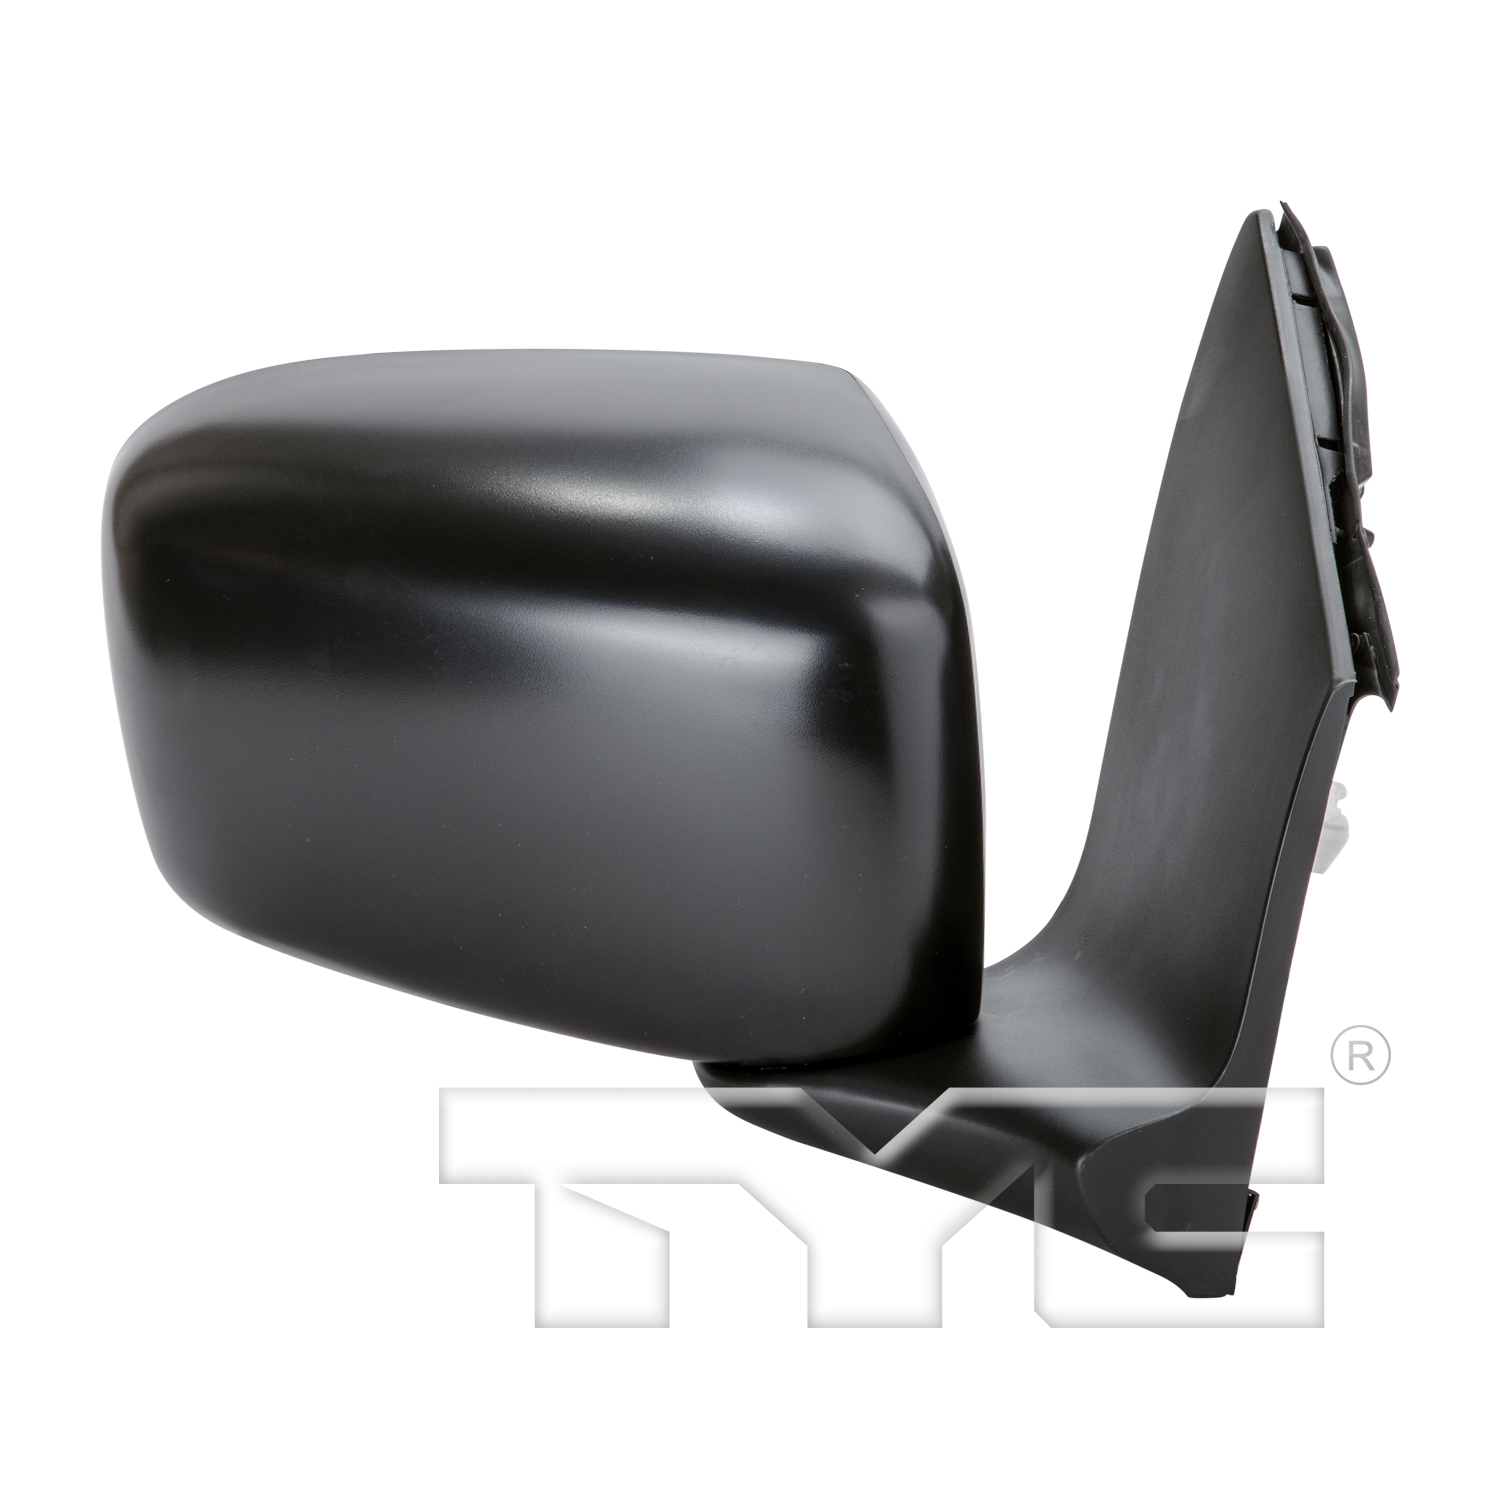 Aftermarket MIRRORS for HONDA - ODYSSEY, ODYSSEY,05-10,RT Mirror outside rear view